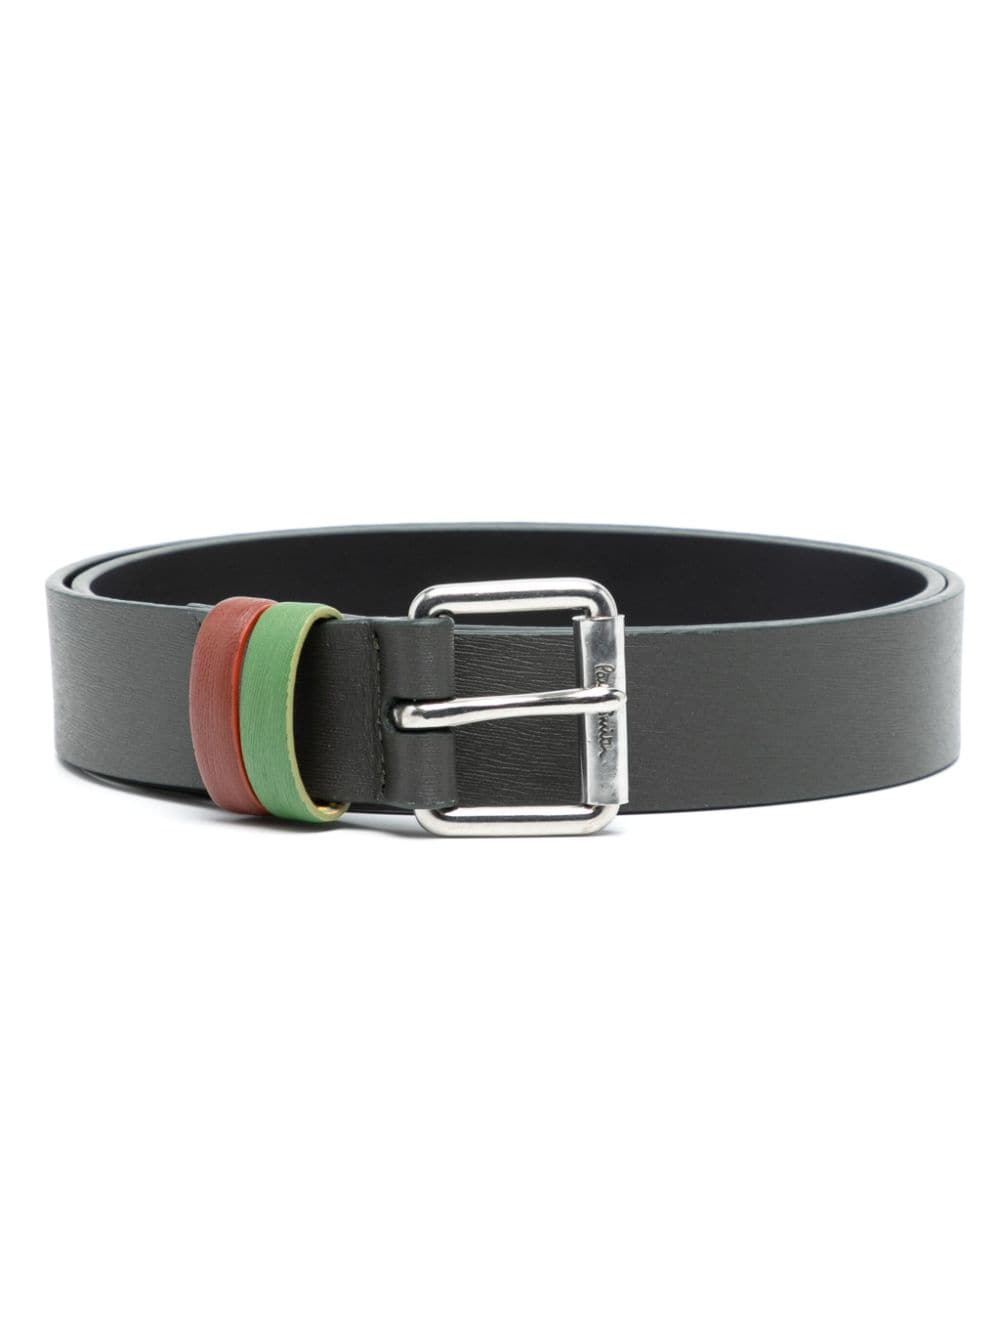 Paul Smith buckled leather belt - Green von Paul Smith